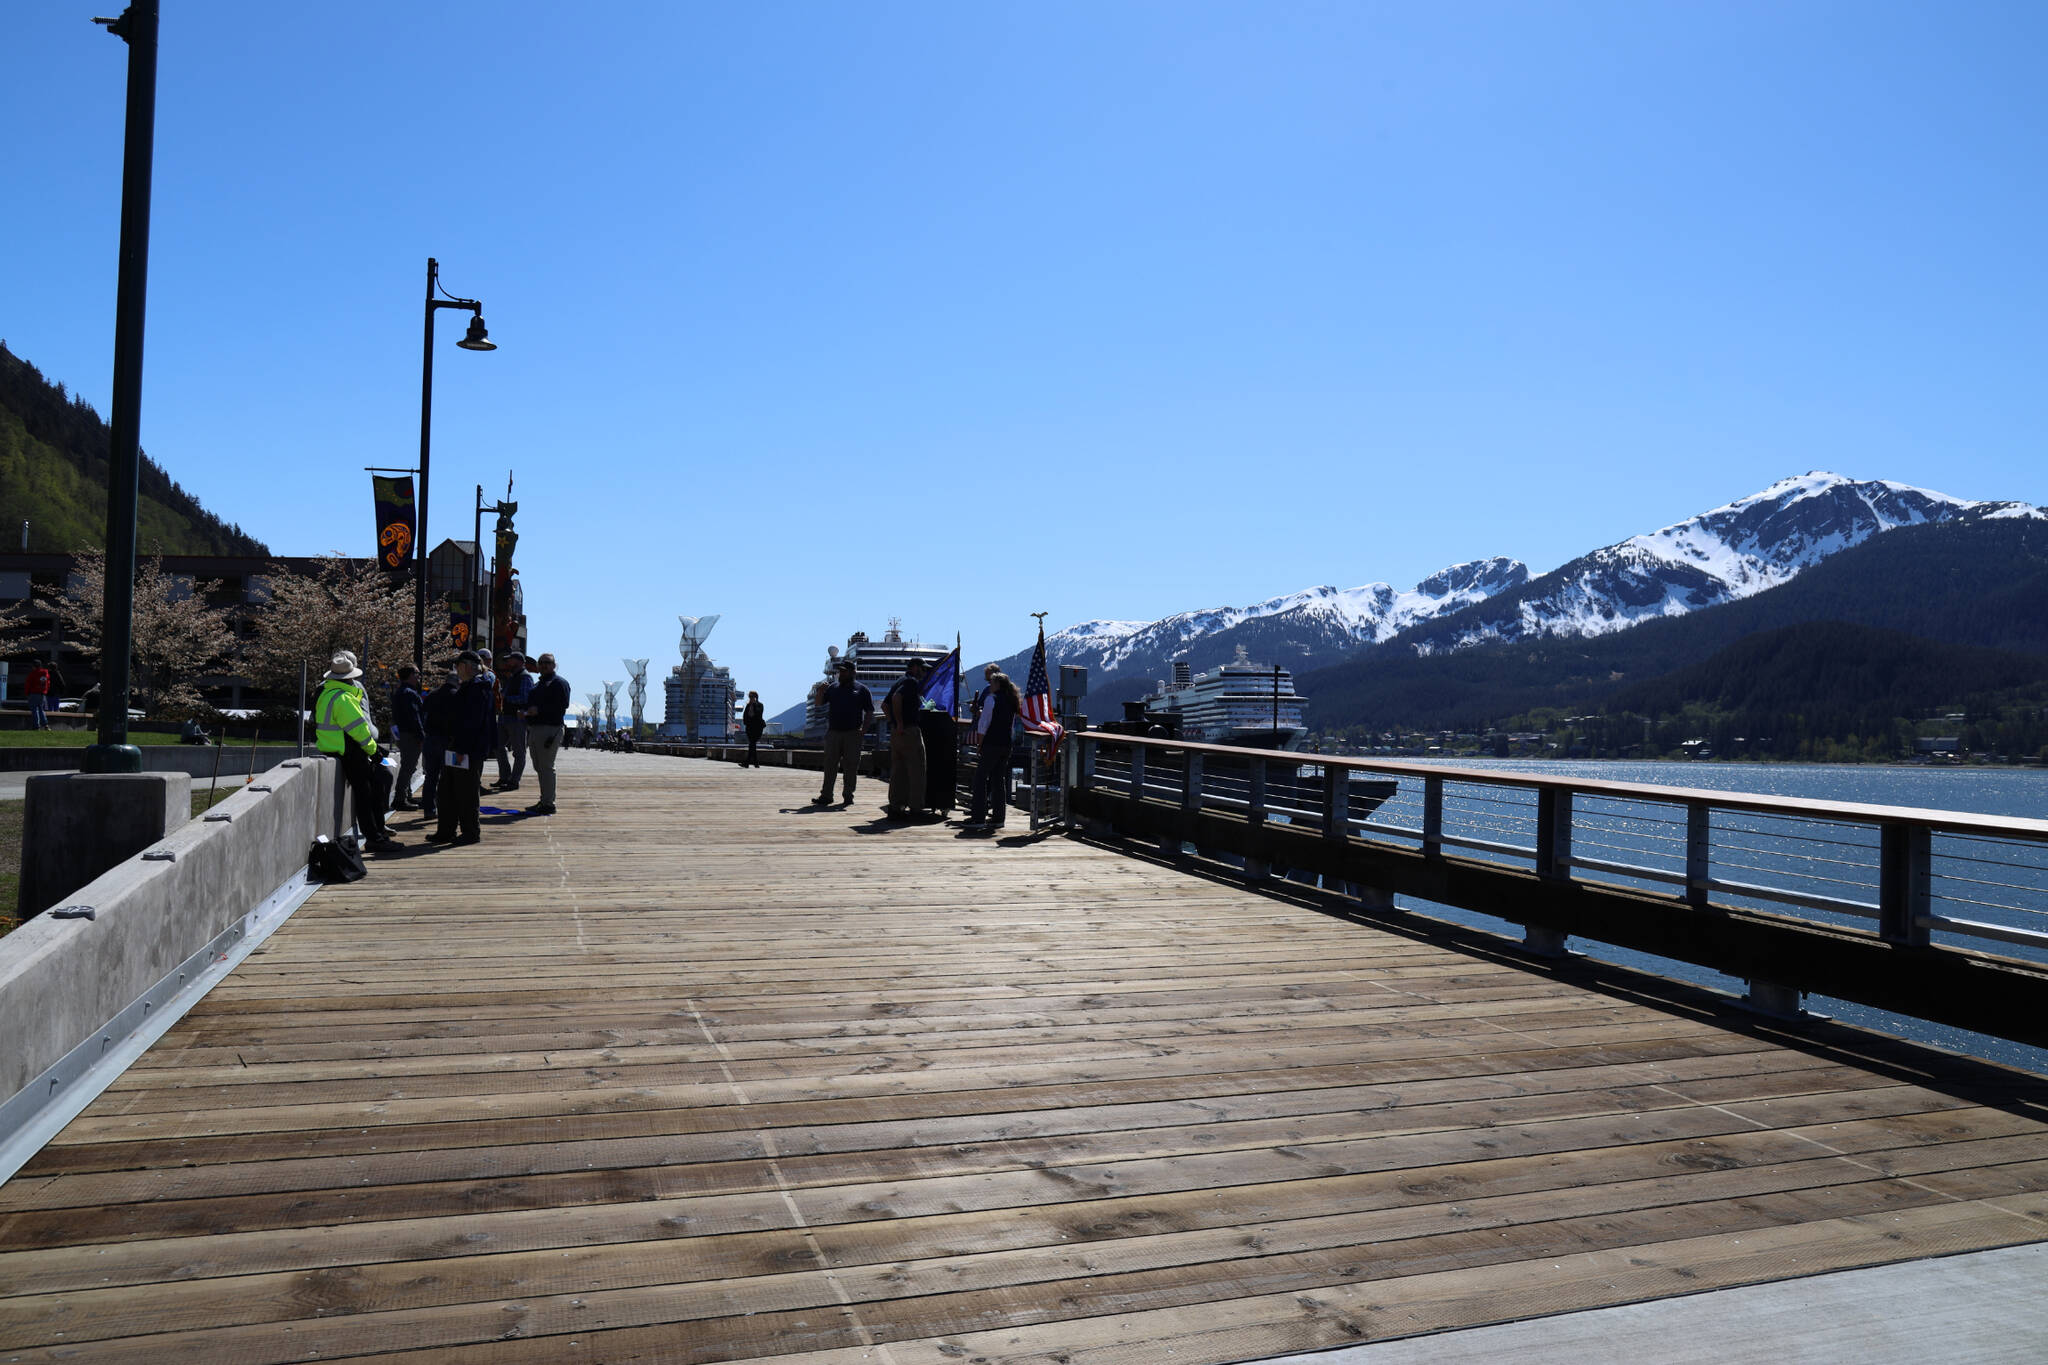 The Docks and Harbors Marine Deckover Project extends the existing Seawalk into Marine Park via an Americans with Disabilities Act-accessible dock structure and lengthens the waterfront from Merchant’s Wharf to Franklin Dock. (Clarise Larson / Juneau Empire)